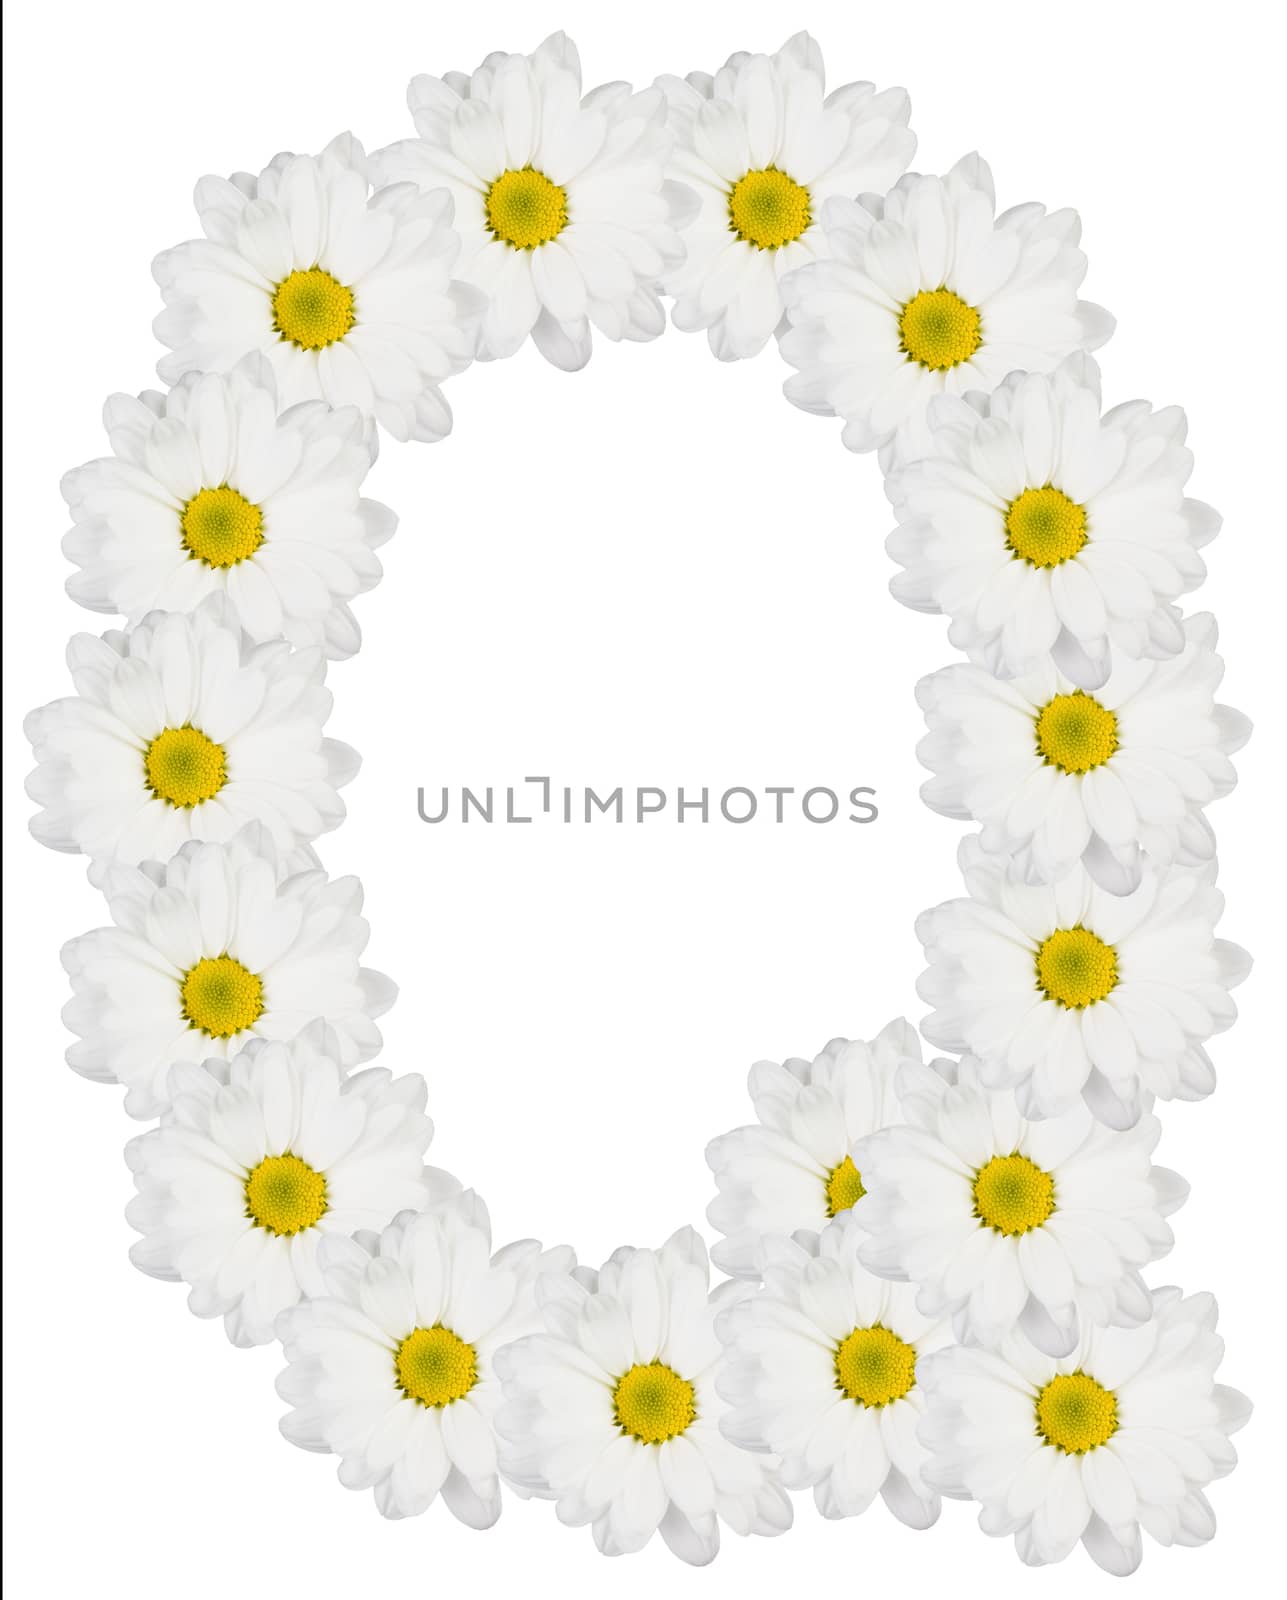 Letter Q made from white flowers